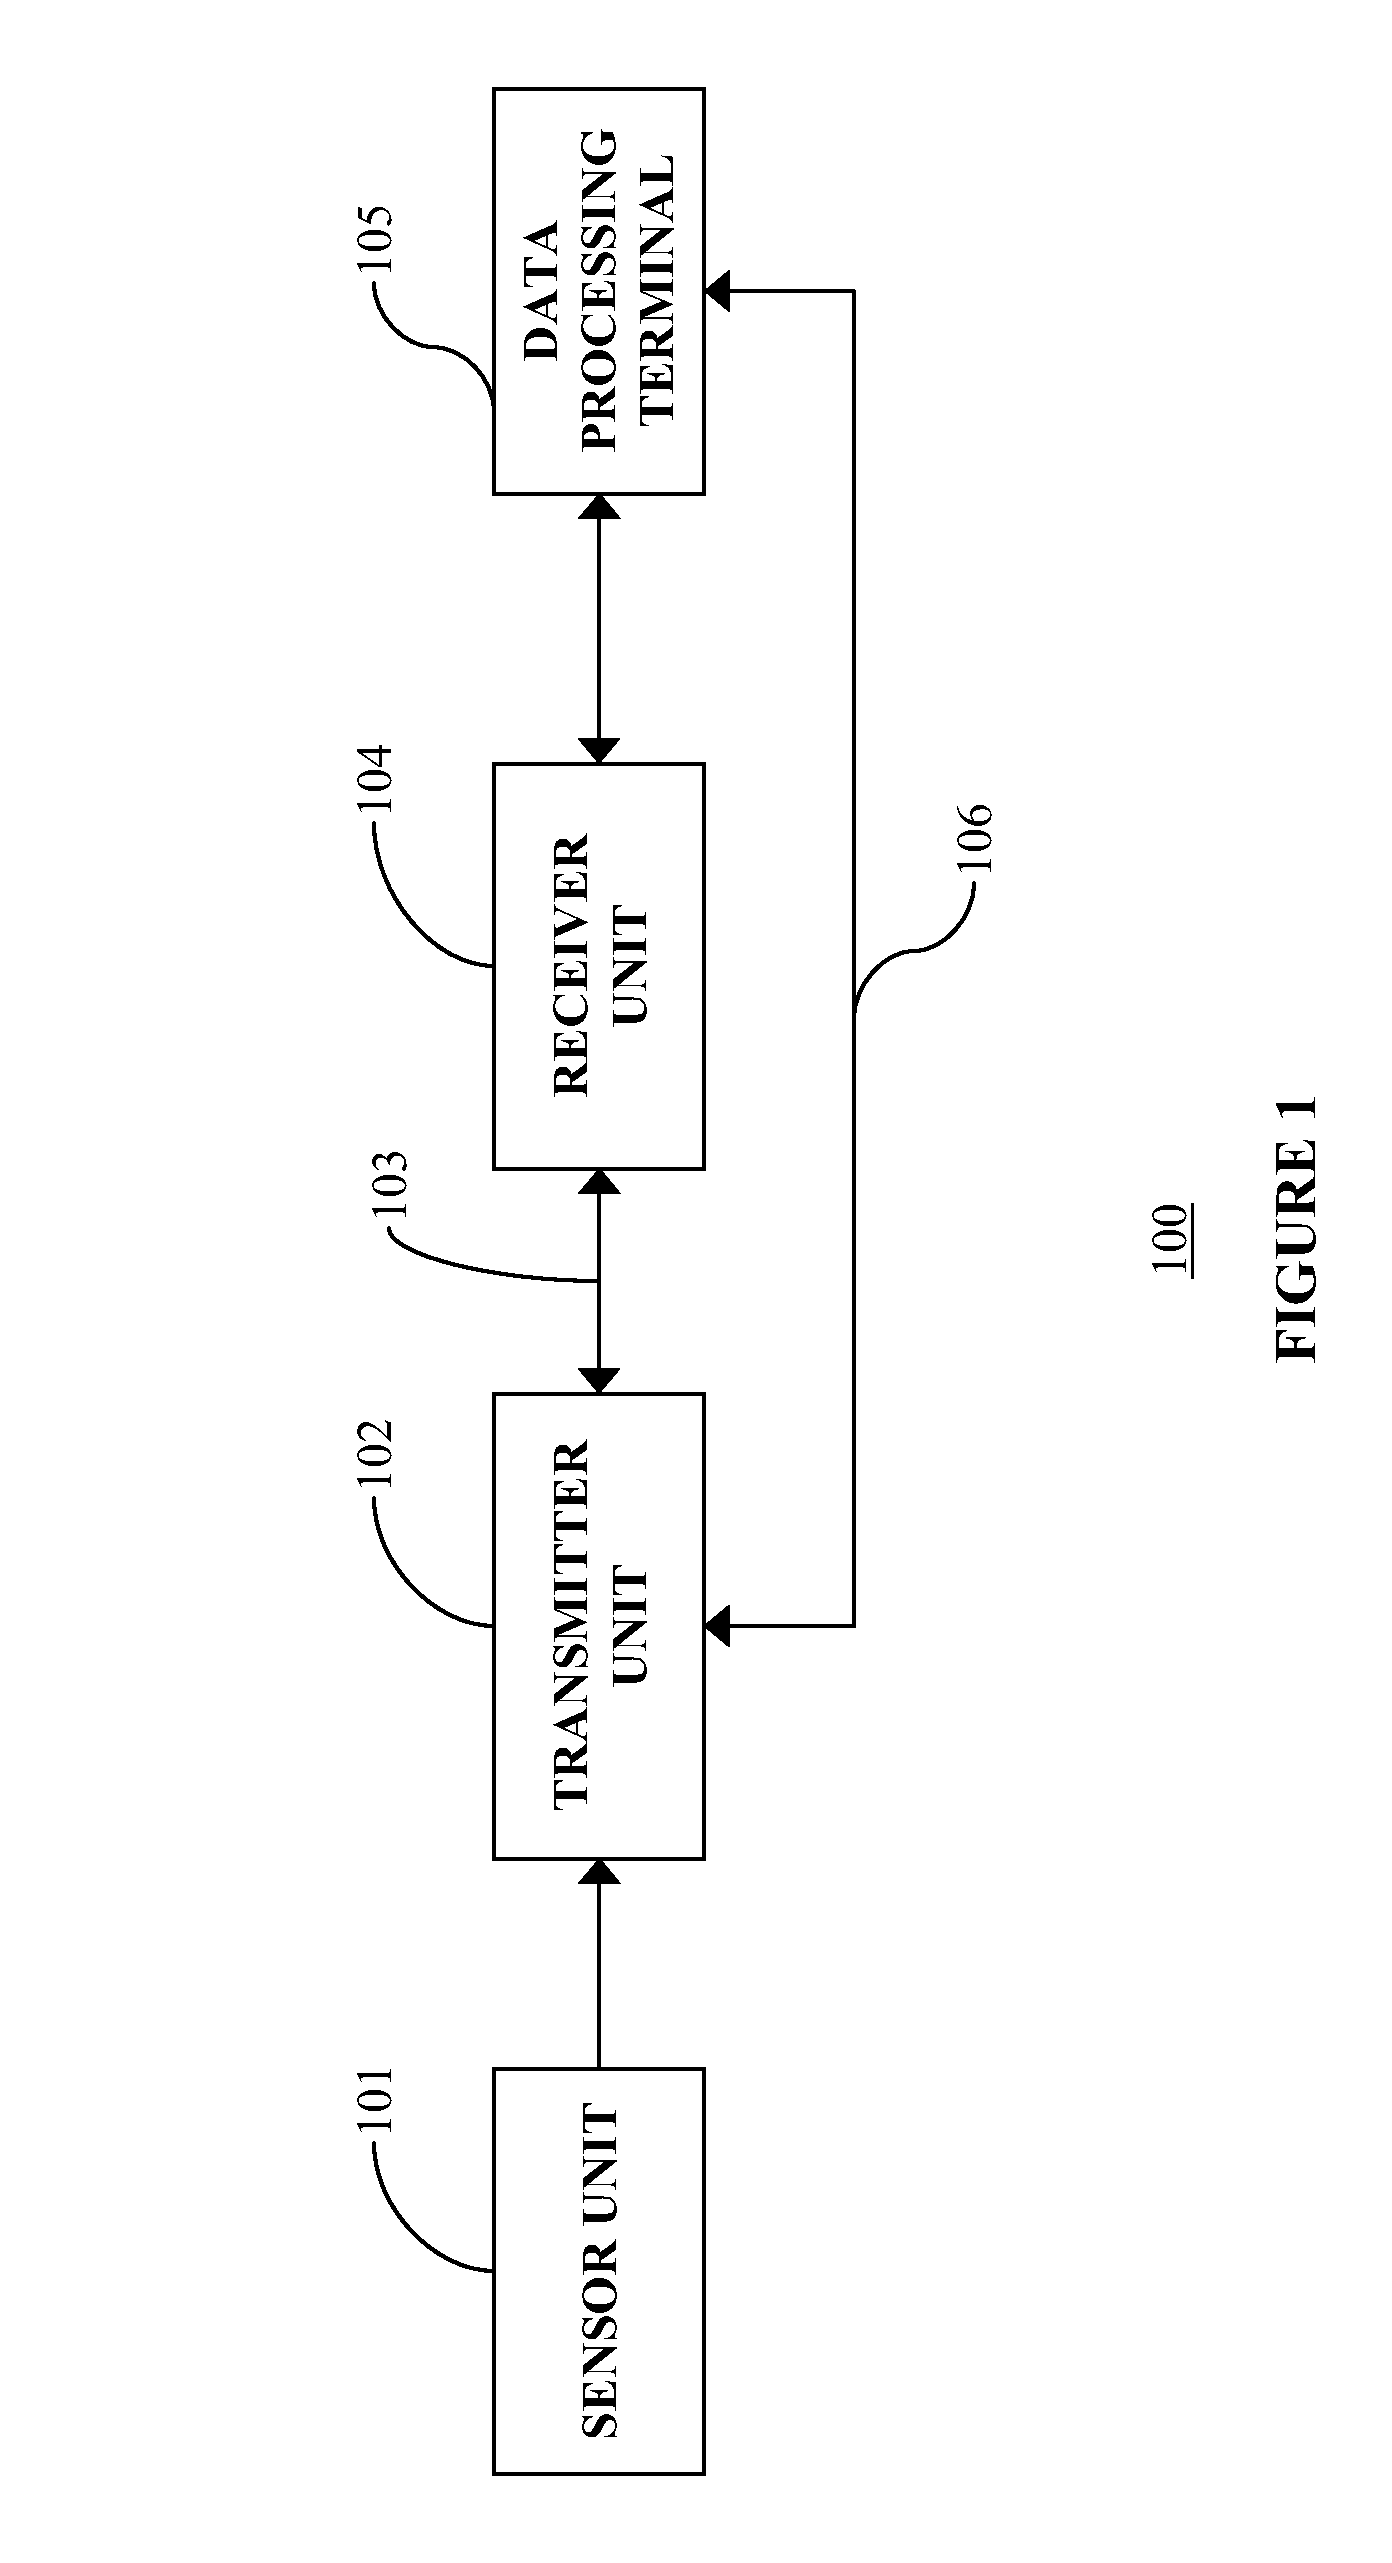 Method and system for powering an electronic device